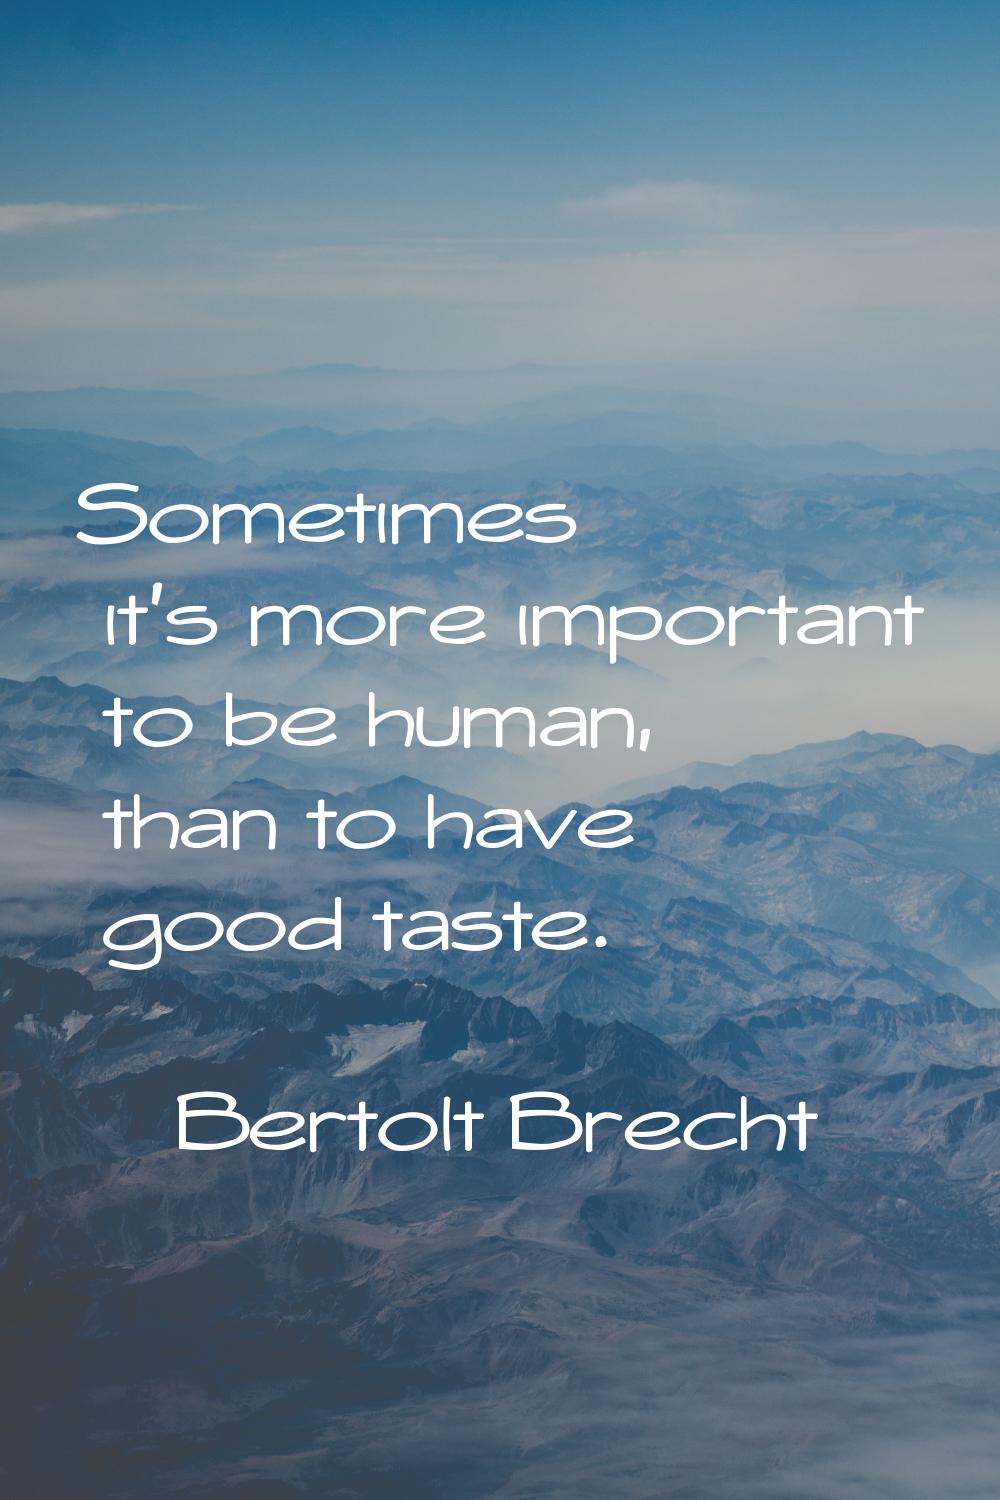 Sometimes it's more important to be human, than to have good taste.